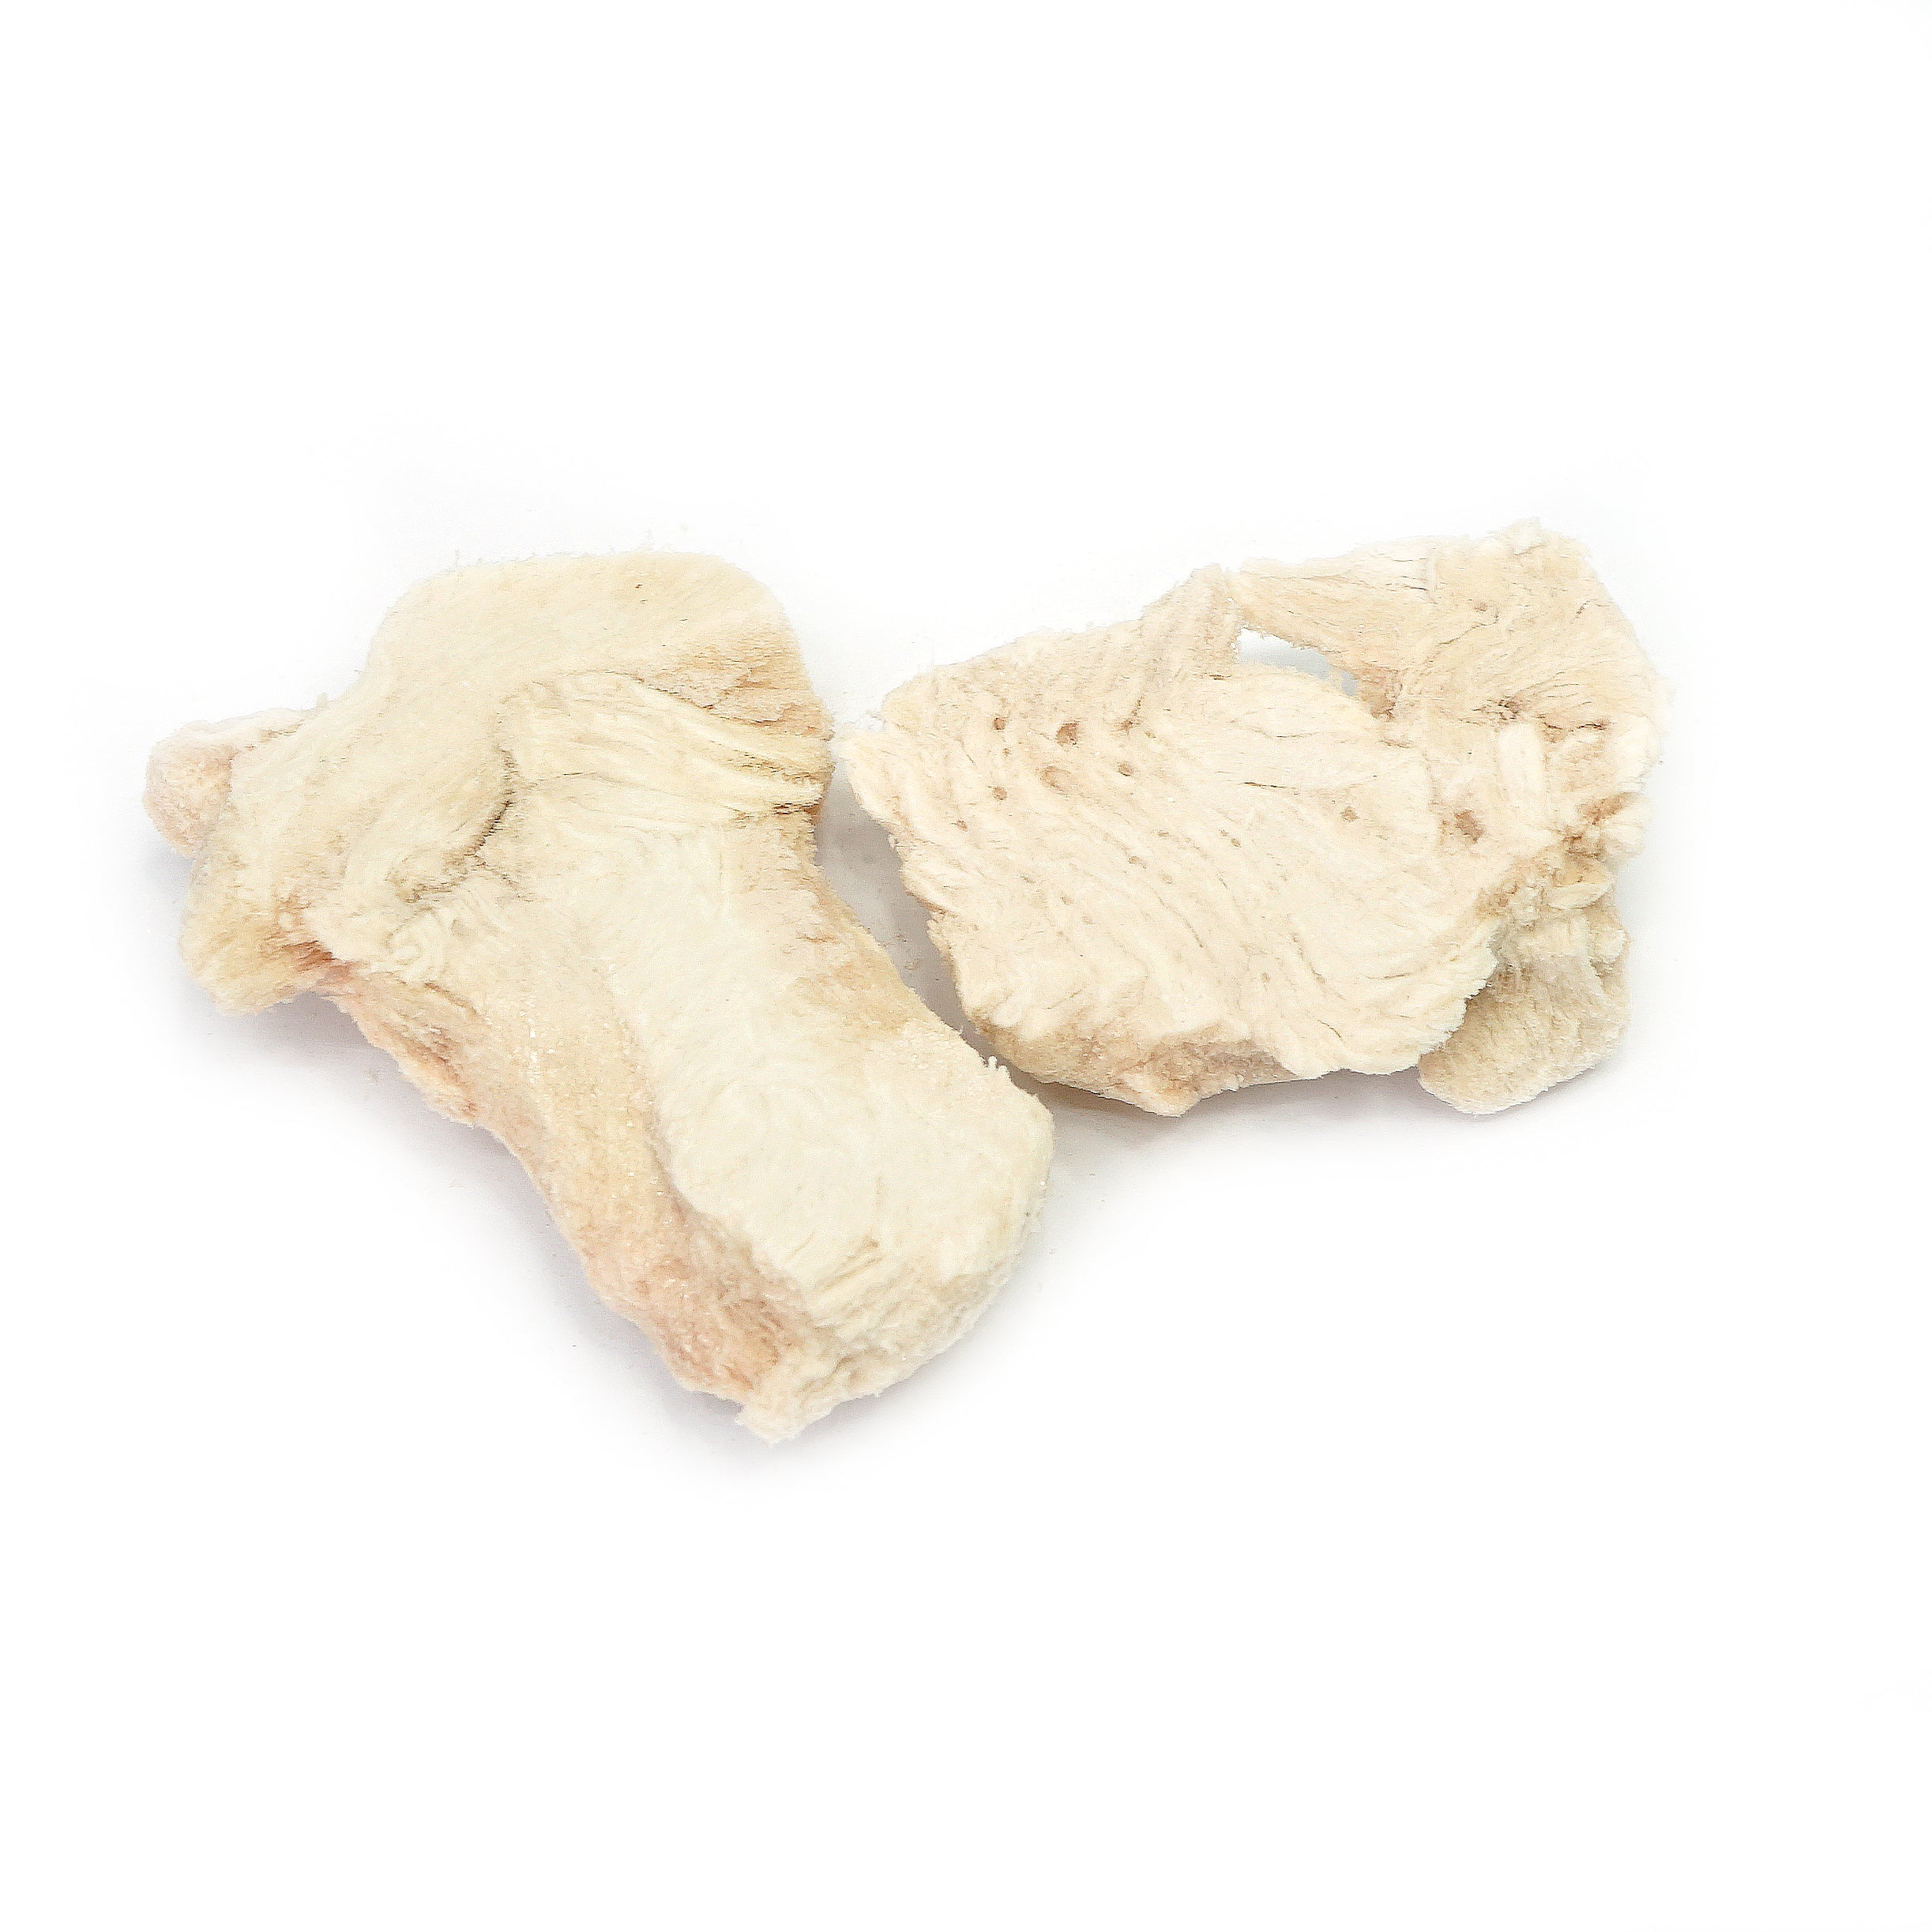 Freeze Dried Chicken Breast Chunks 100g